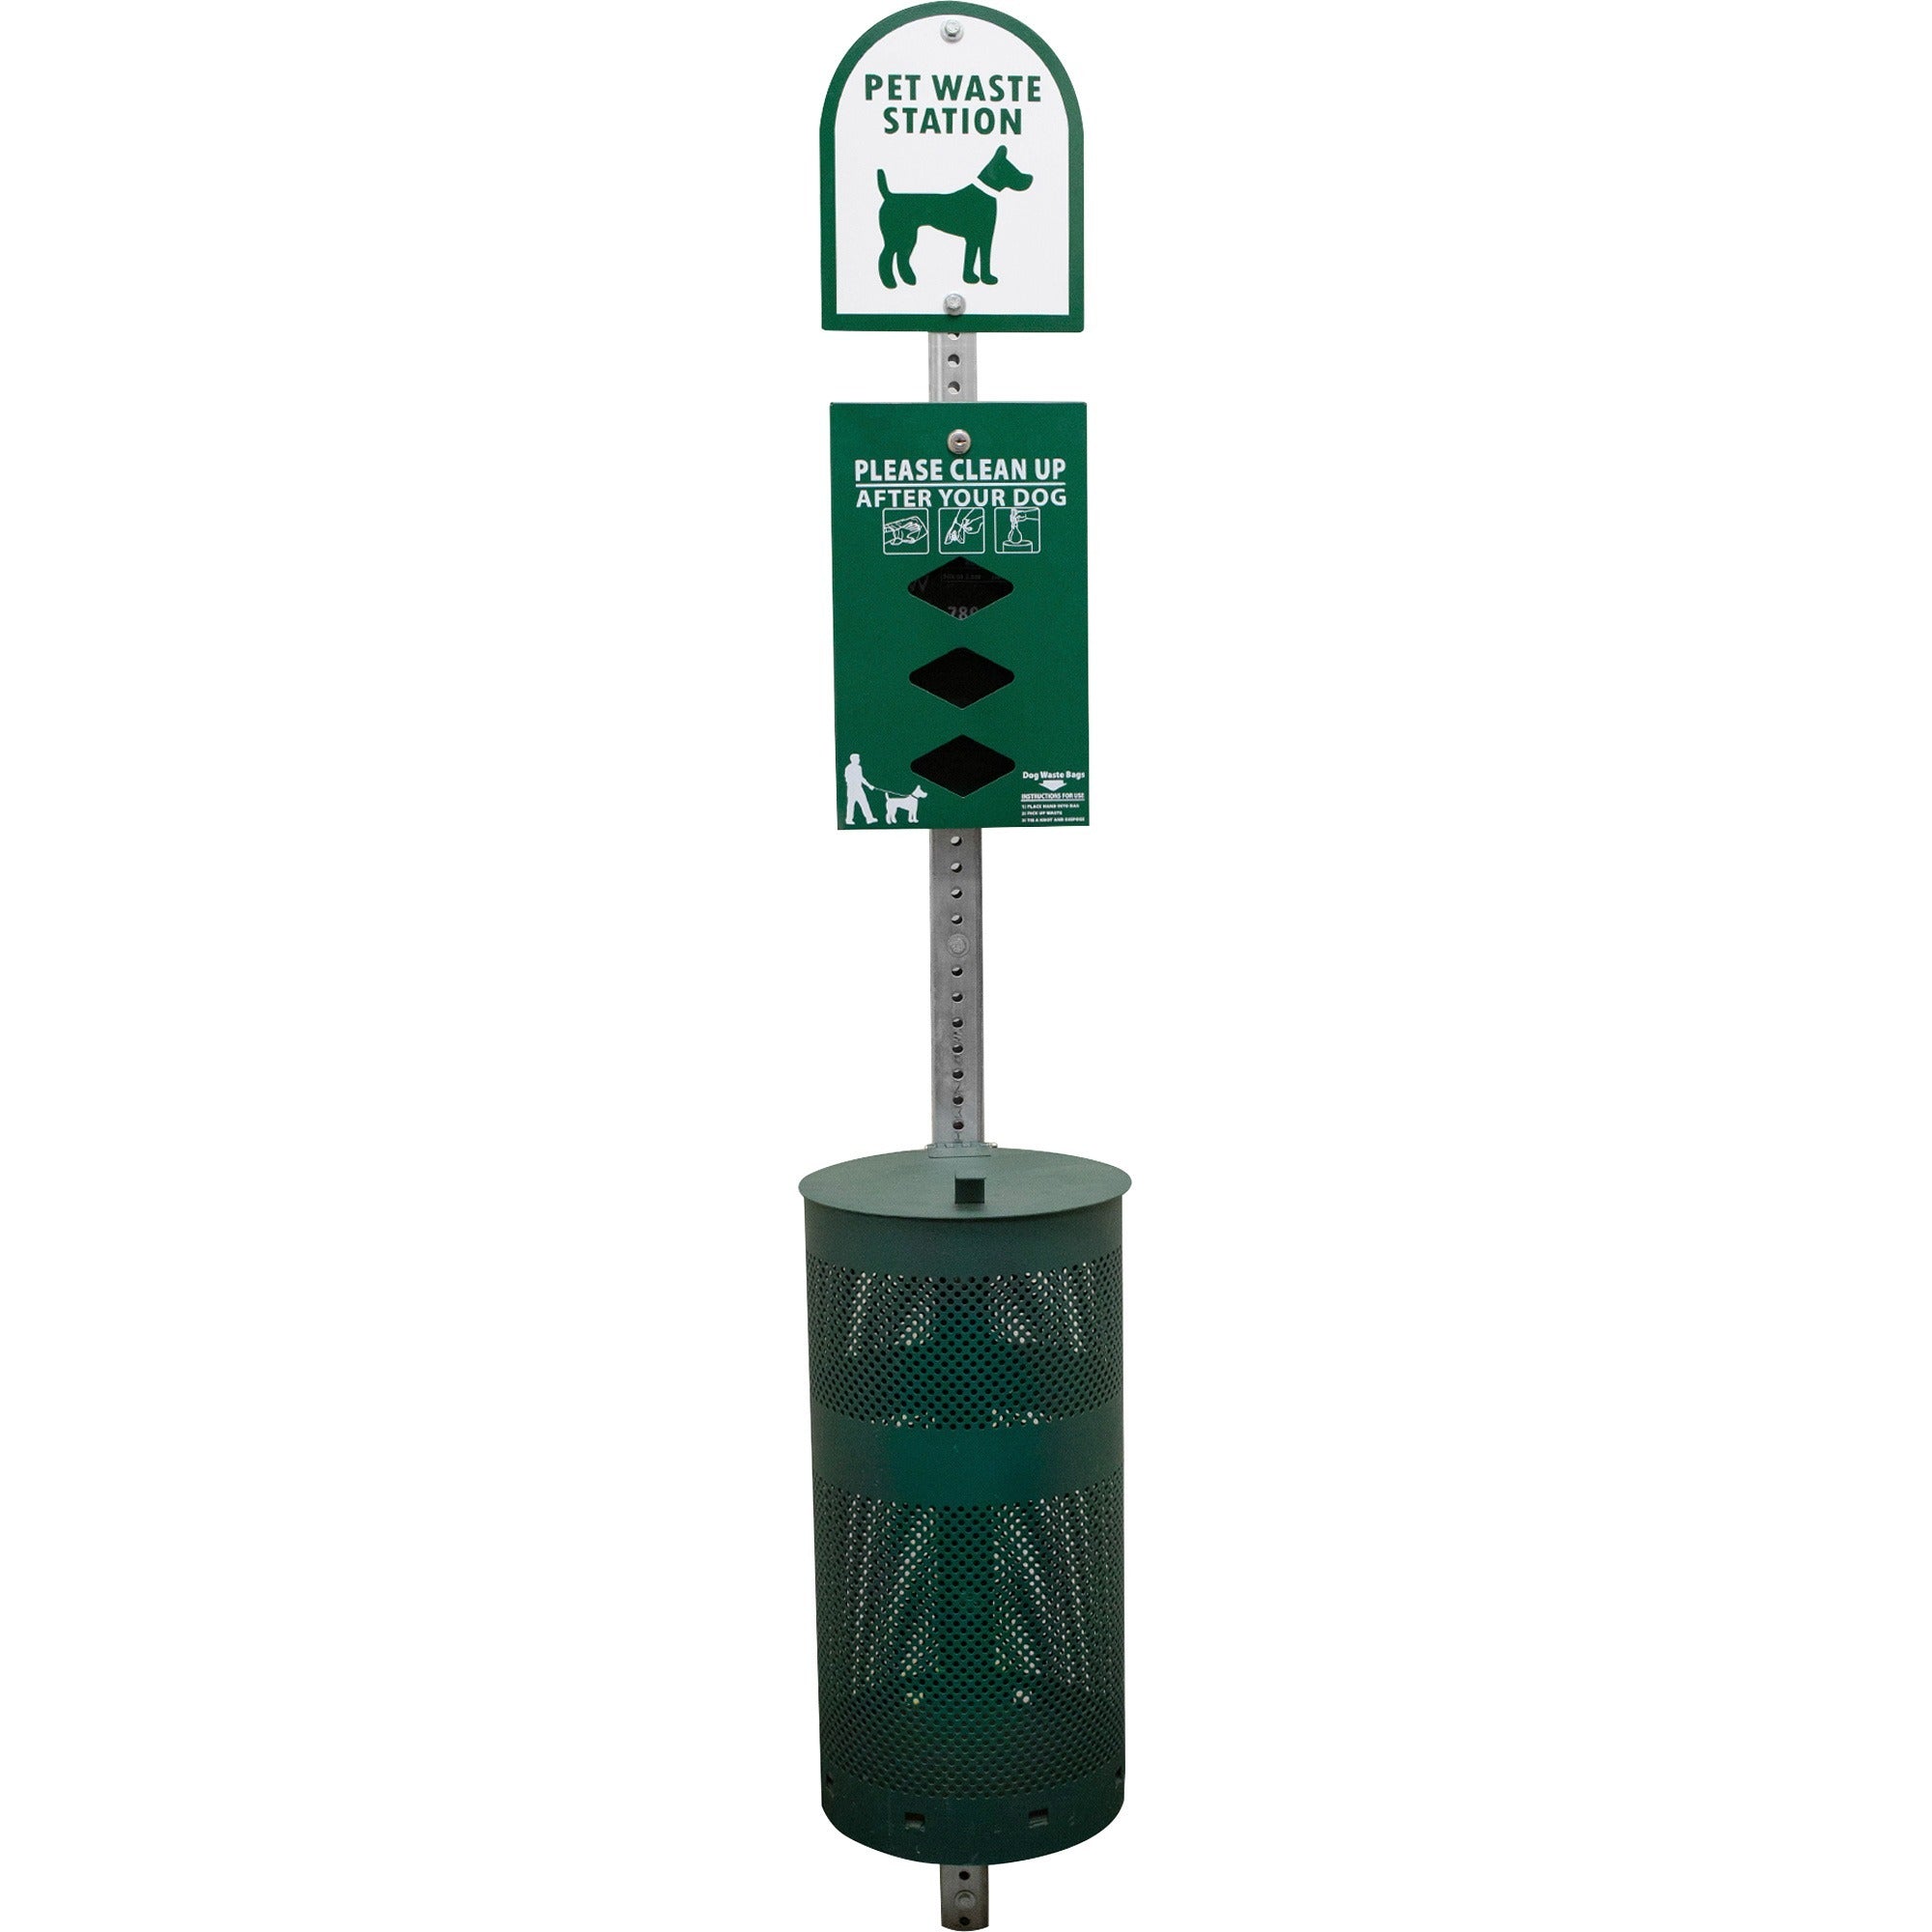 Tatco Dog Waste Station Trash Can - Rust Resistant - Powder Coated Aluminum - Green - 1 Each - 